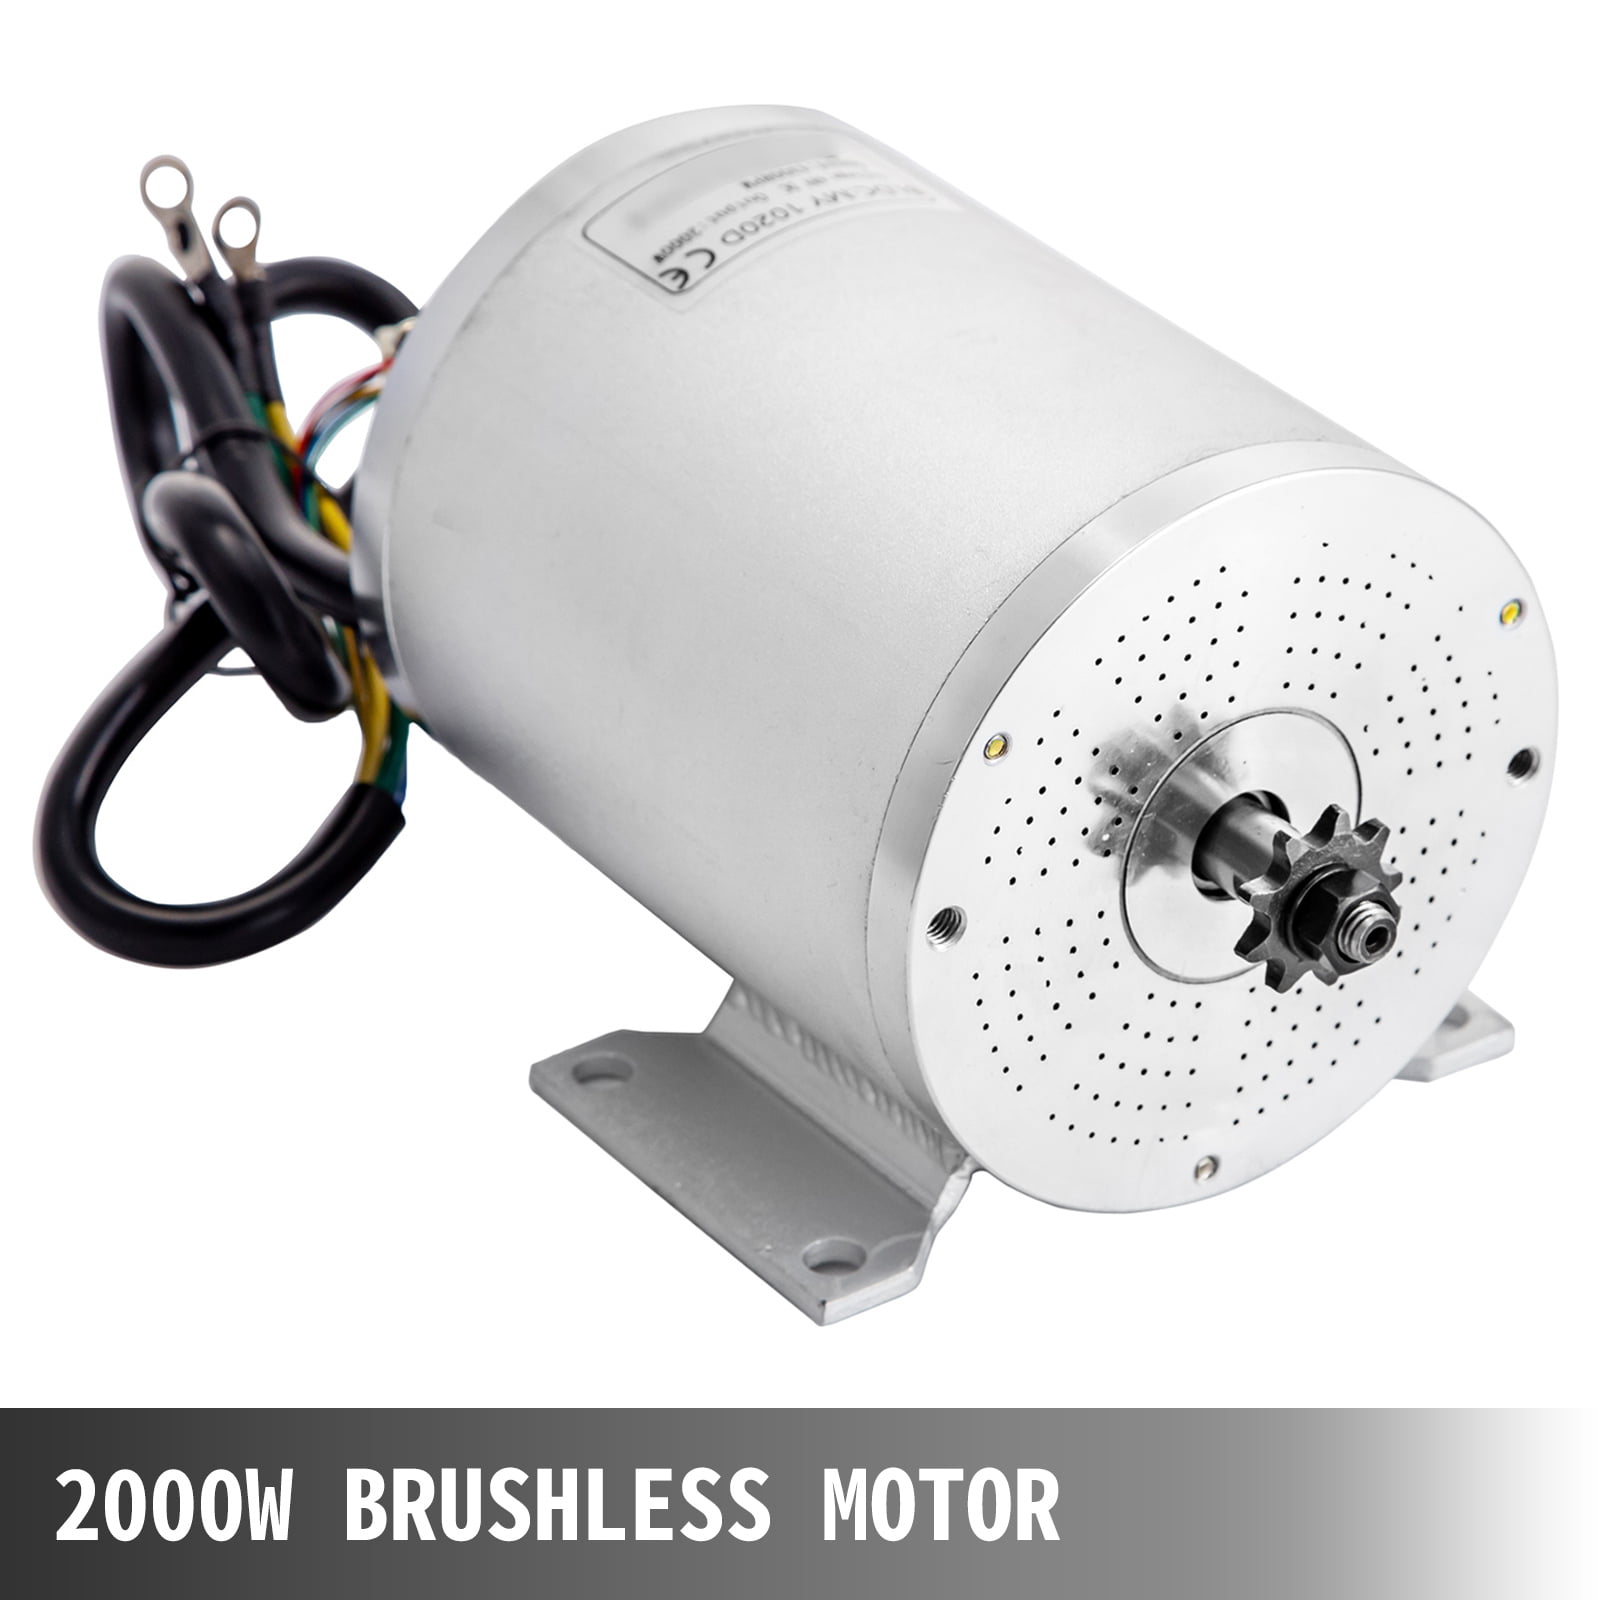 VEVOR 48V 2000W Brushless Motor Kit with Controller Grip Key and 3 Speed Shifter 